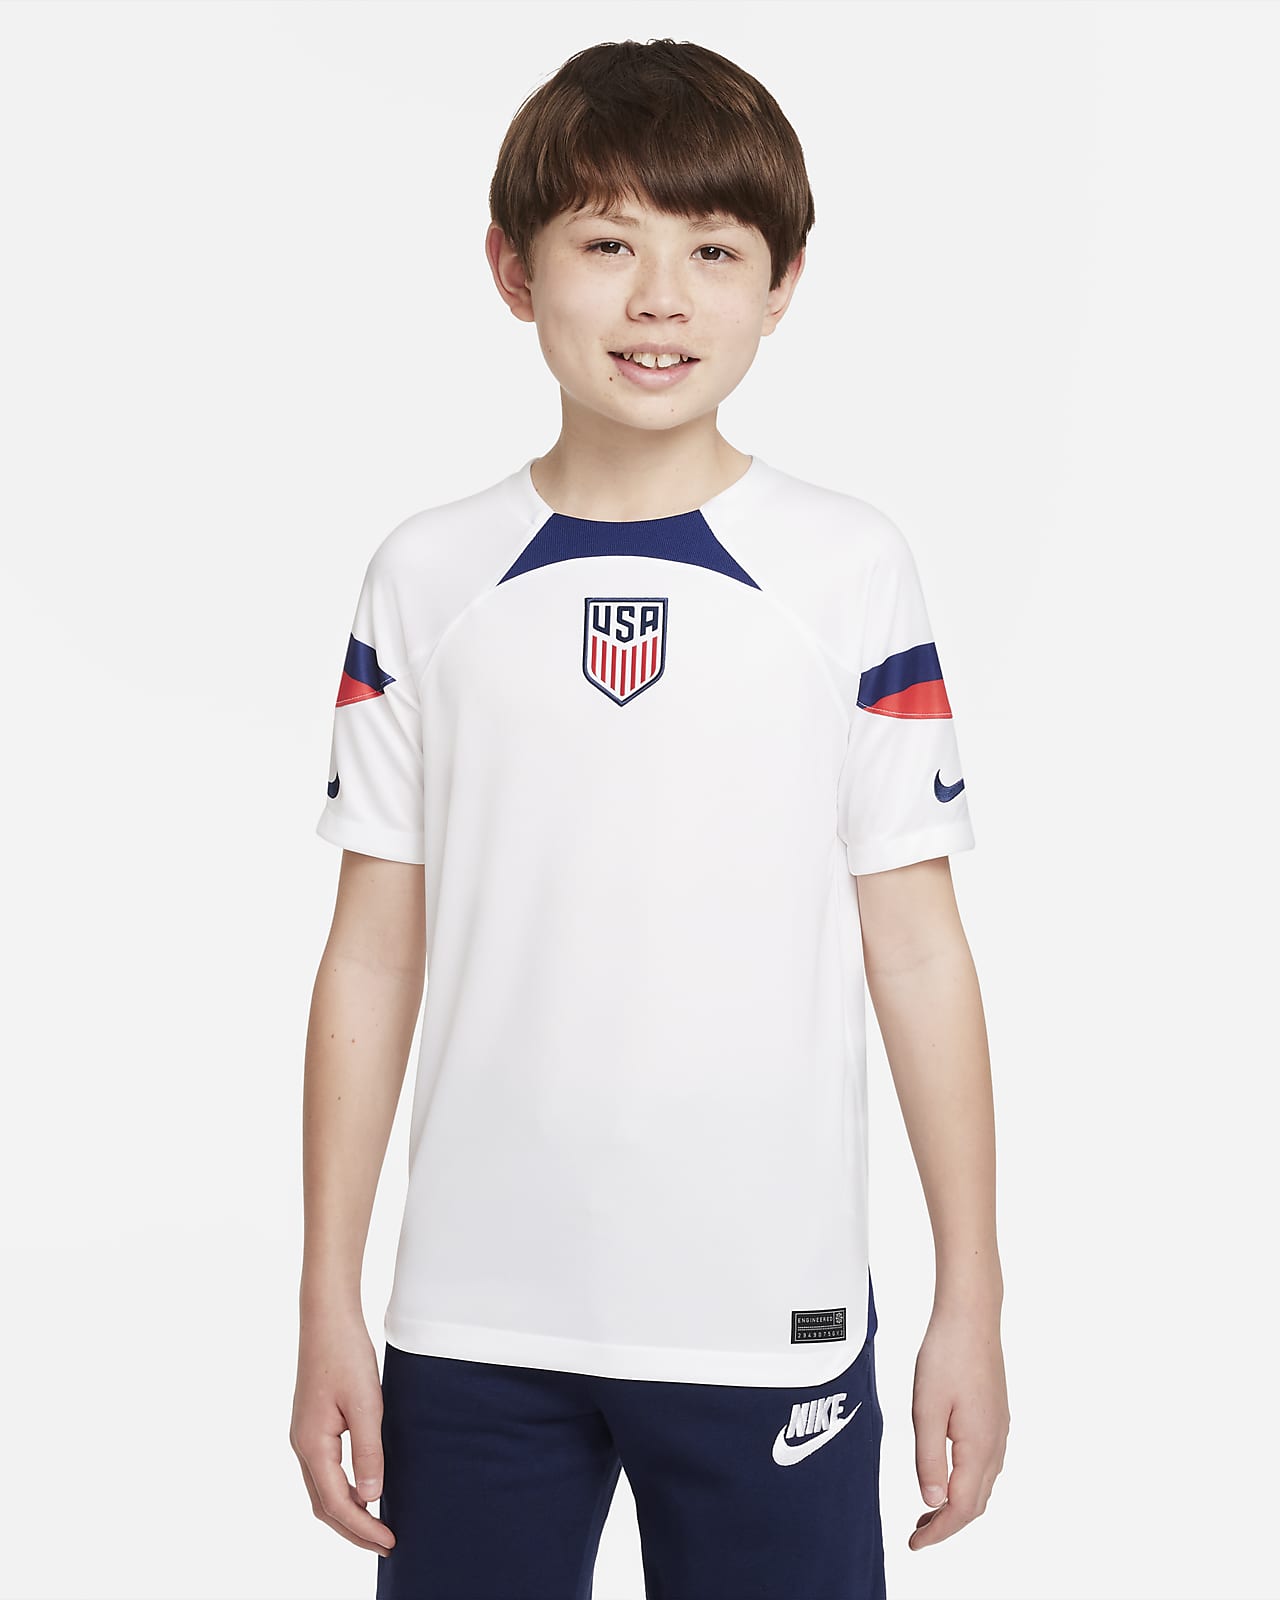 soccer jersey giveaway